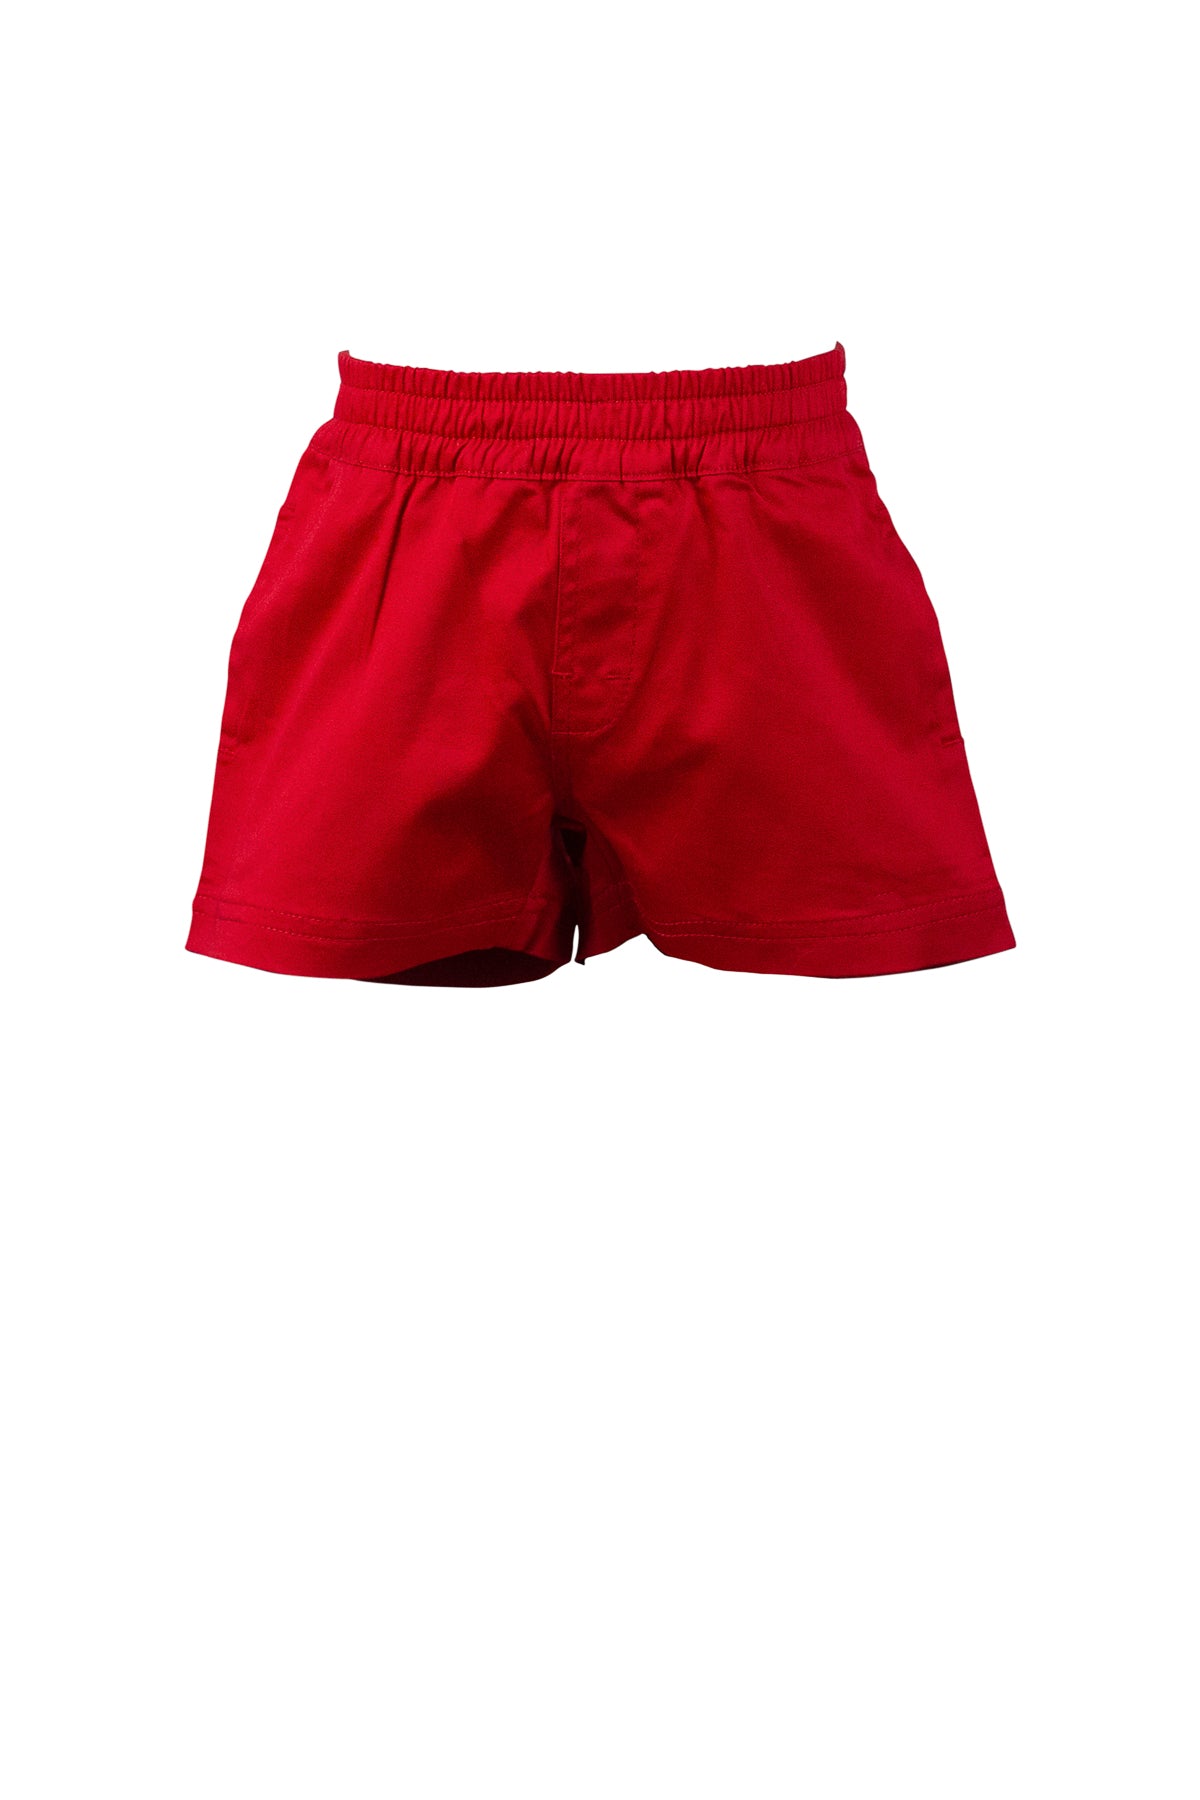 Spencer Shorts- Red